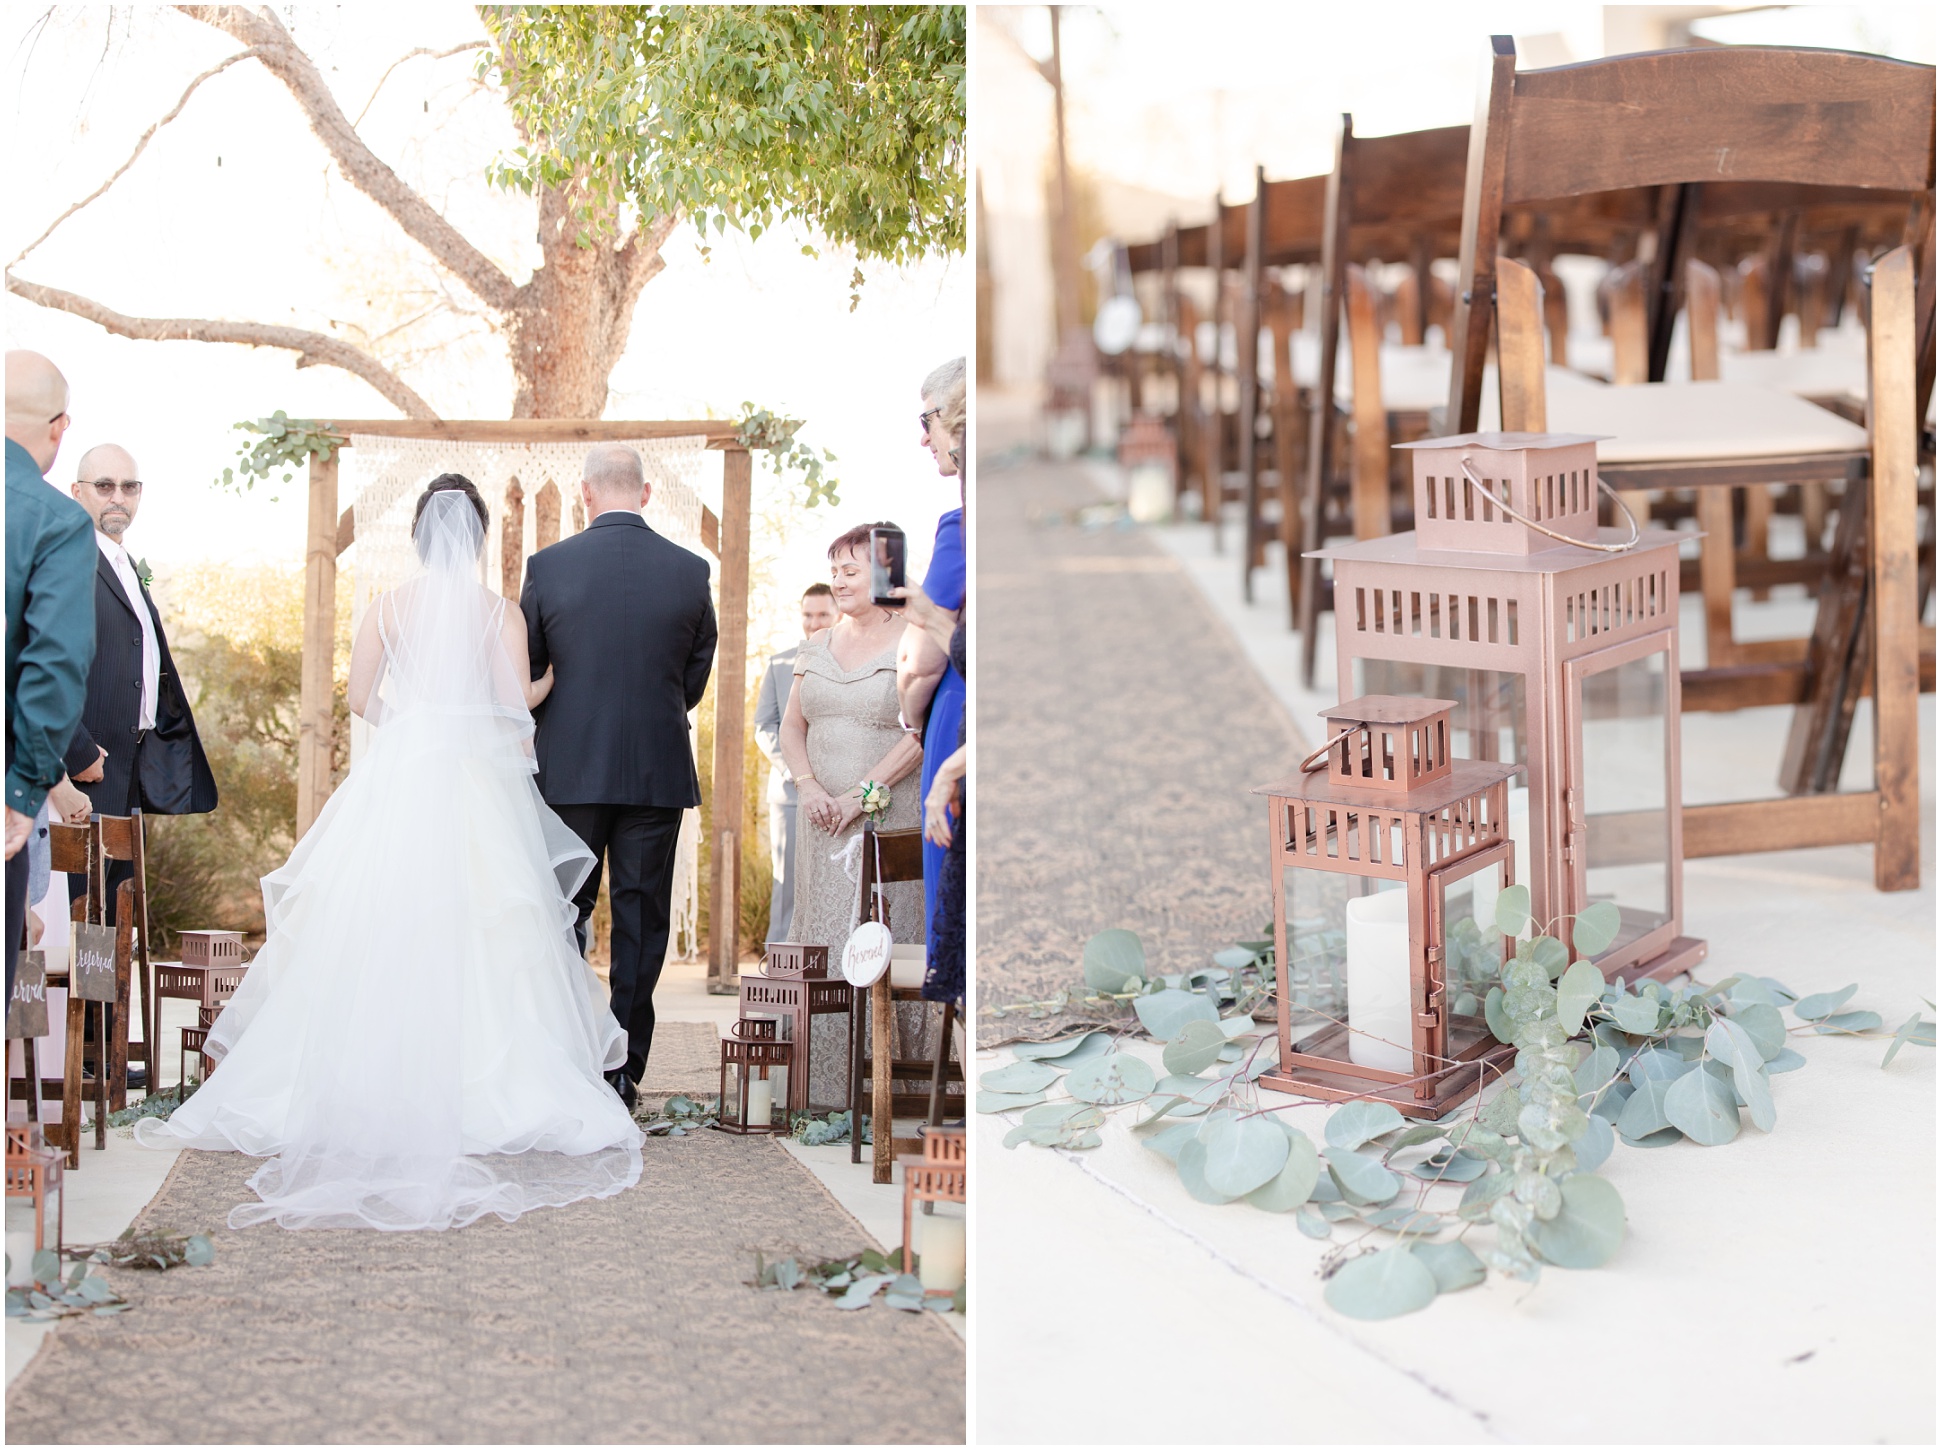 Bride being walked down aisle by dad, Rustic candle lamps with silver dollar plant on the floor